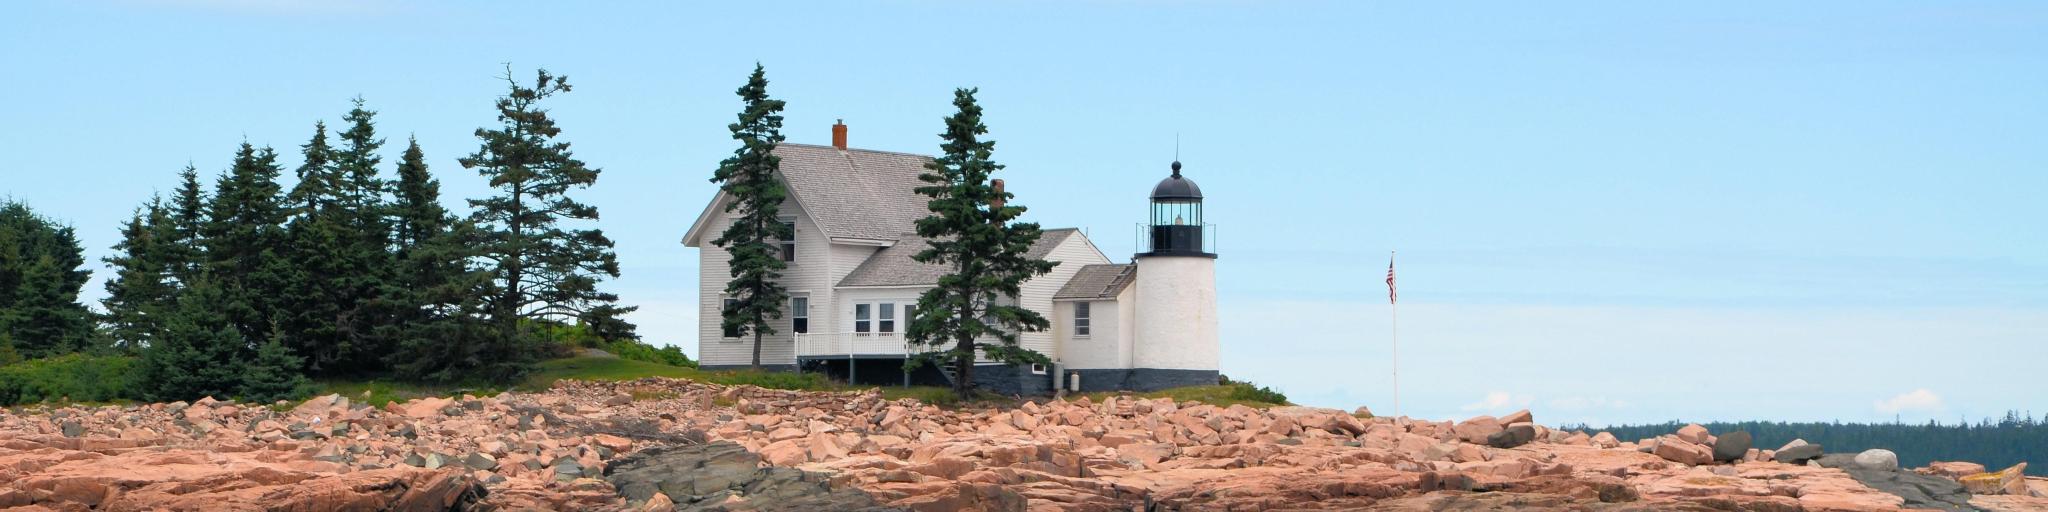 One of several lighthouses in Bar Harbor area of Maine on a mostly clear day